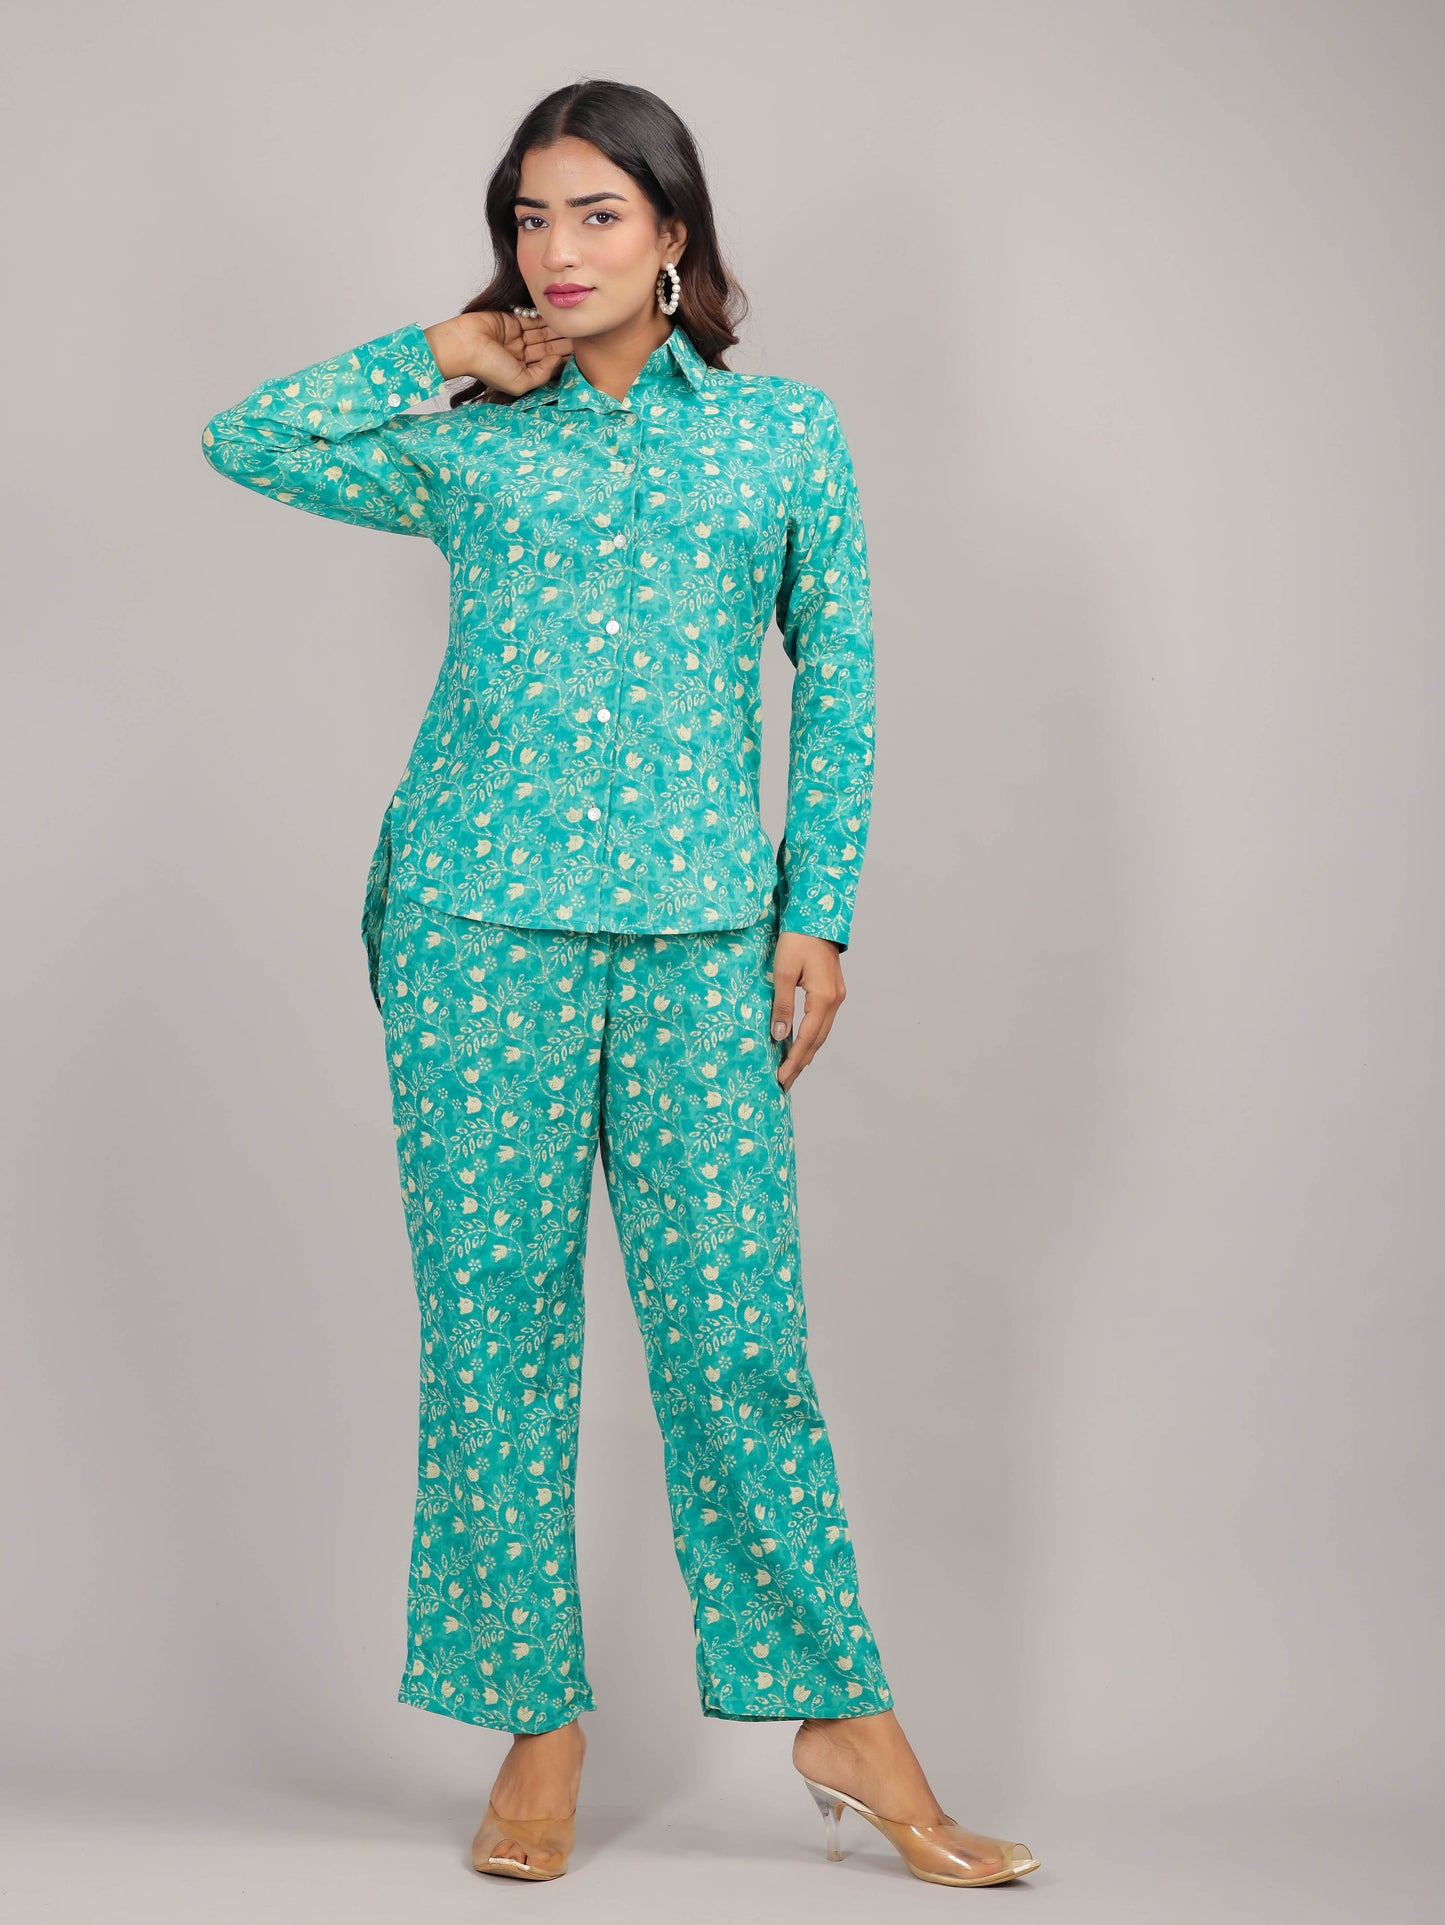 Floral Print on Teal Cotton Shirt Set for Women